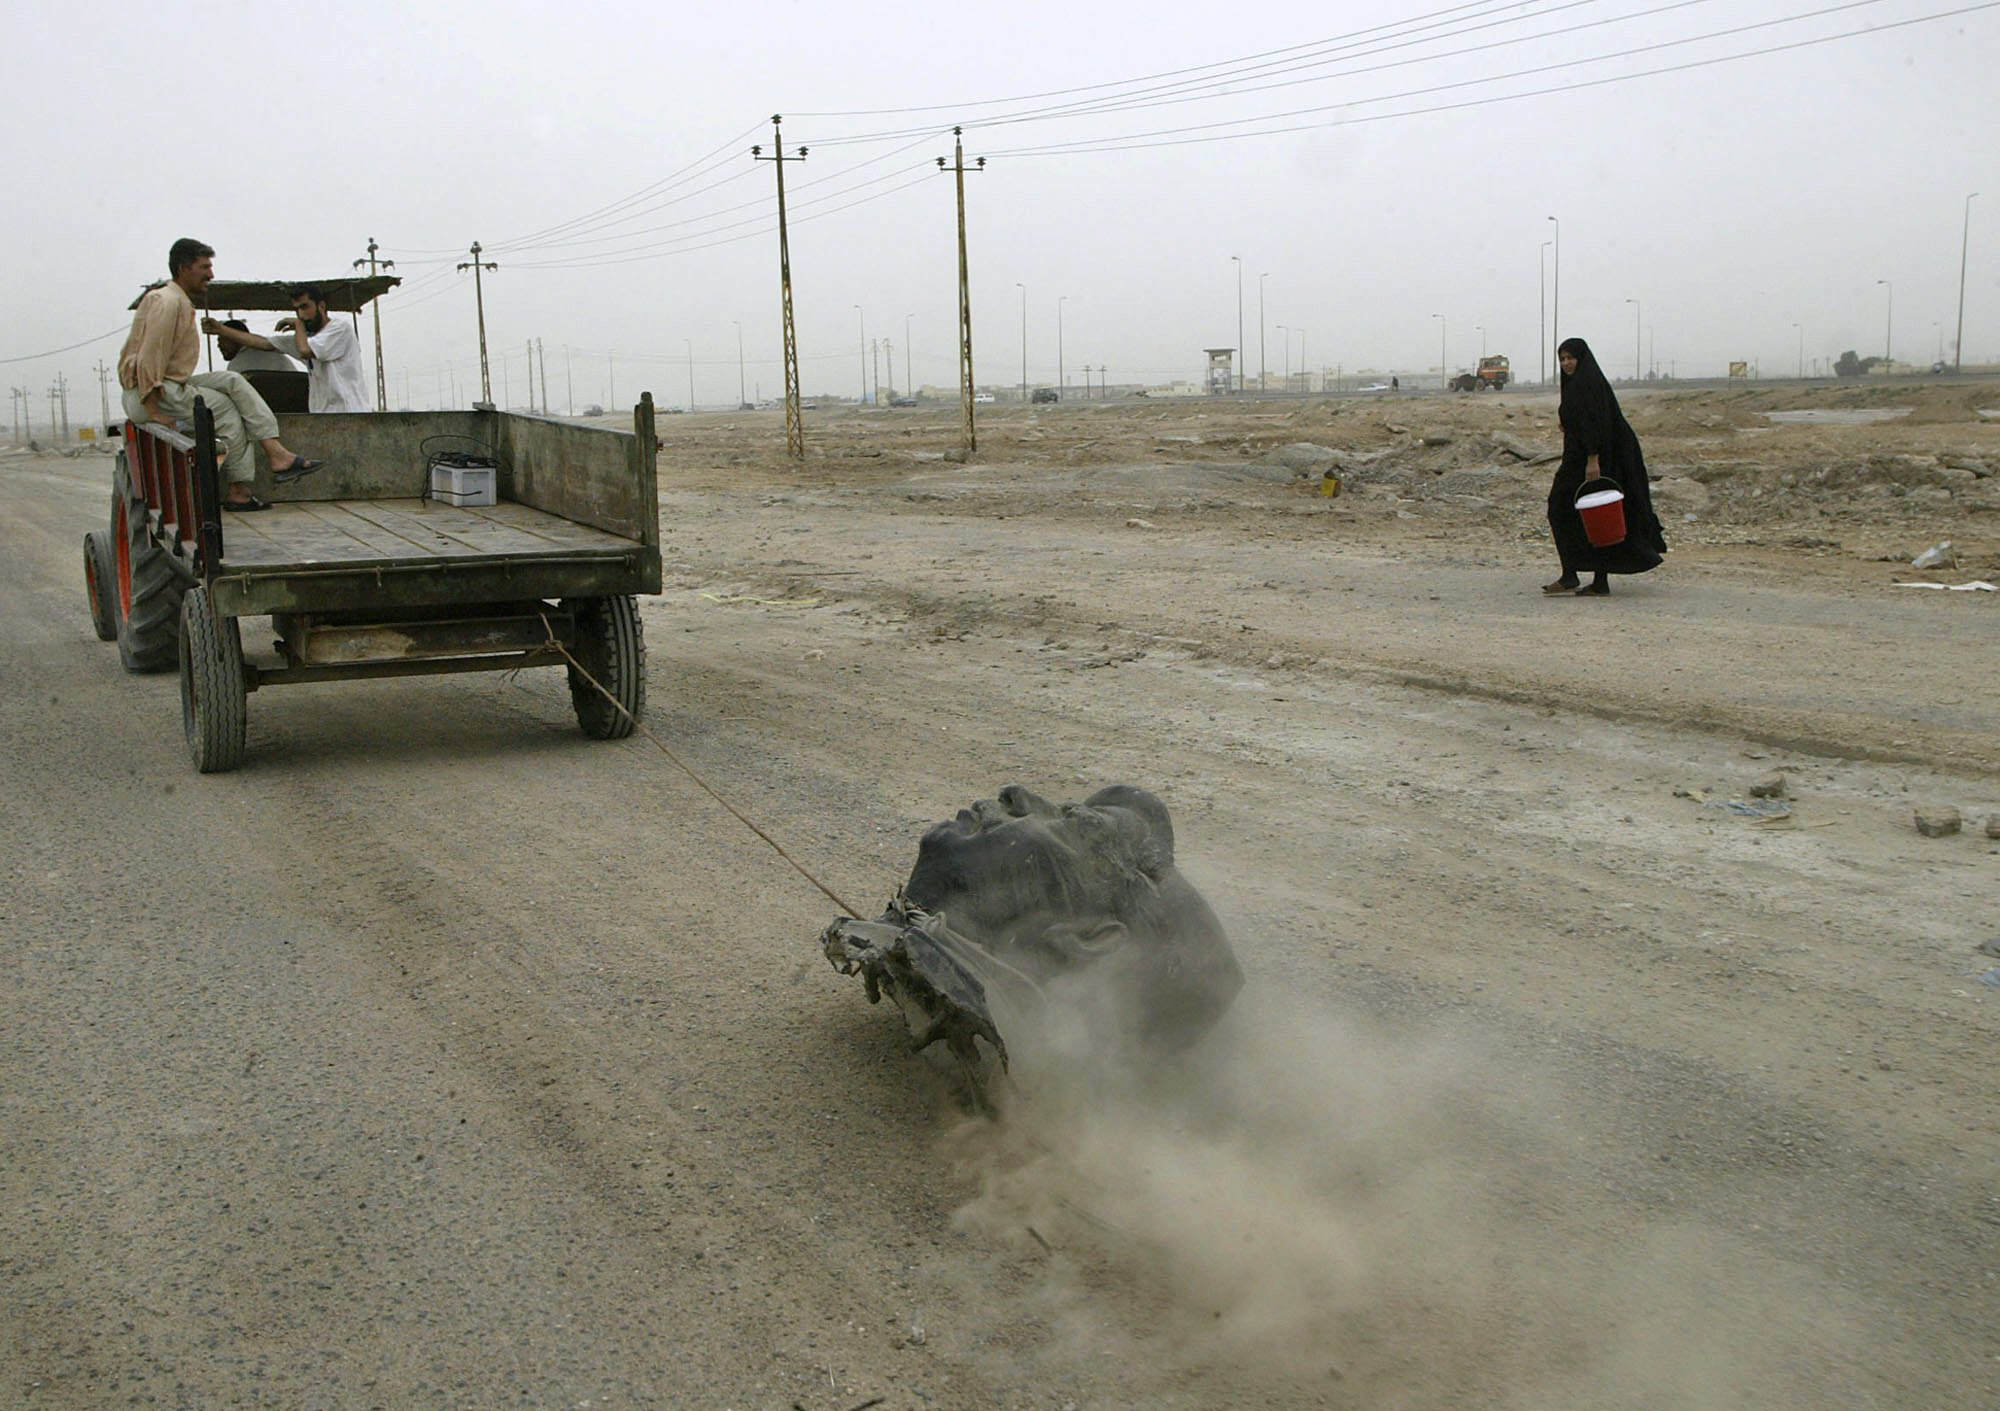 Civilians use a tractor to drag the head of a decapitated Saddam Hussein statue down a gravel road on the edge of Basra, Iraq, April 10, 2003.